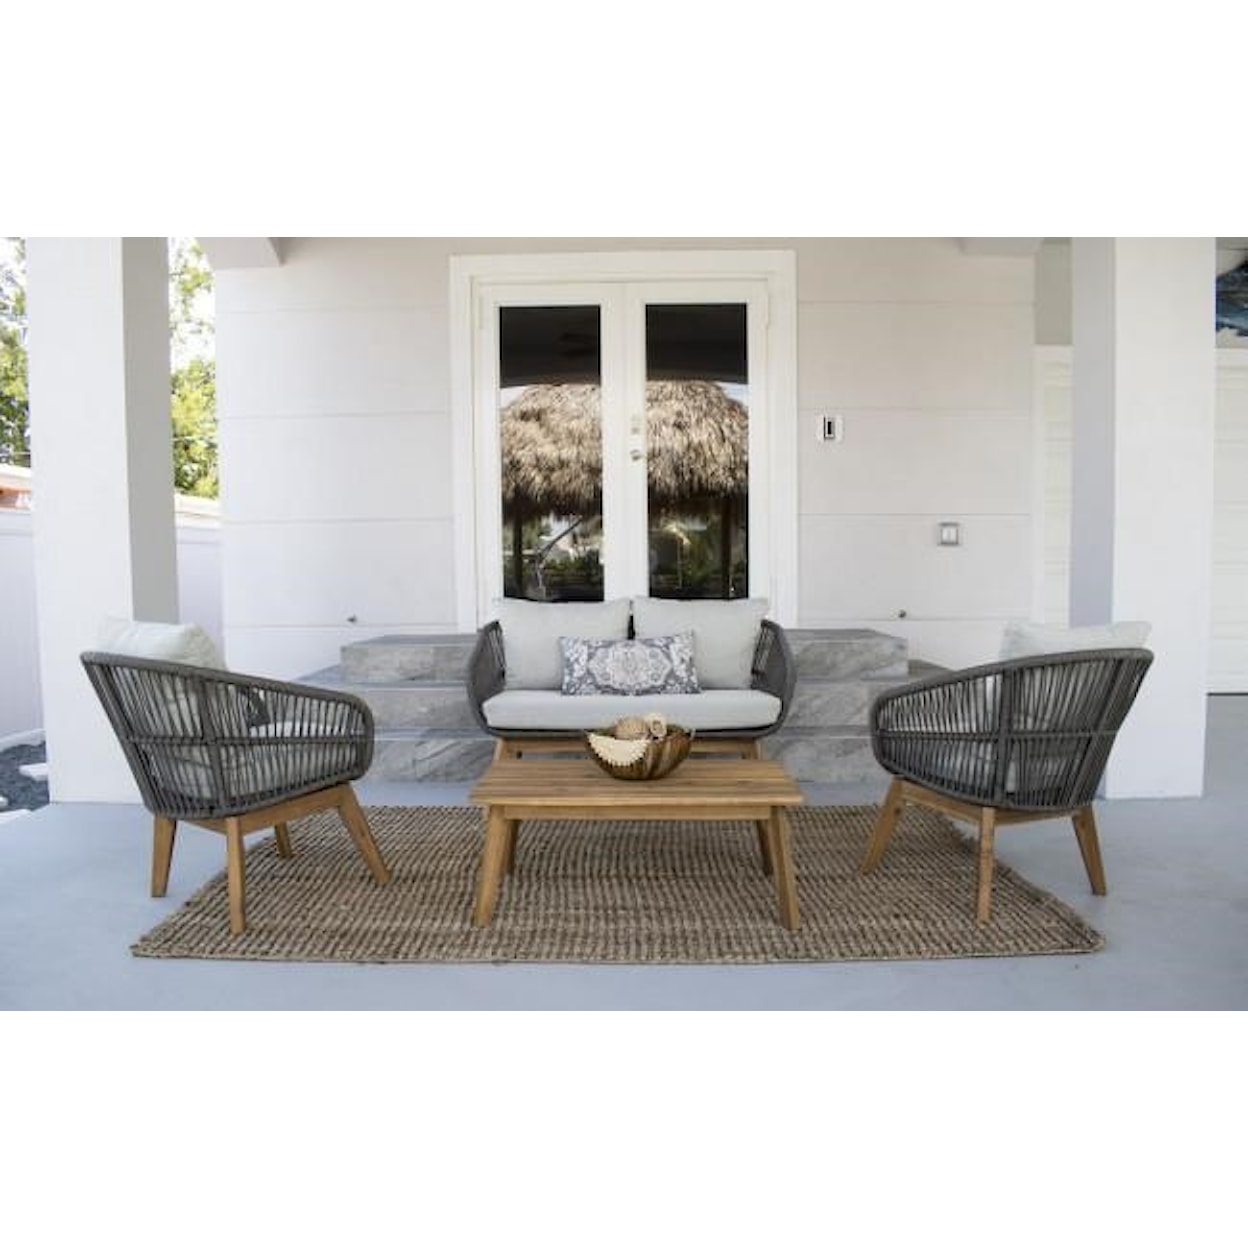 Pelican Reef Surfers Cove Surfers Cove 4 Piece Settee